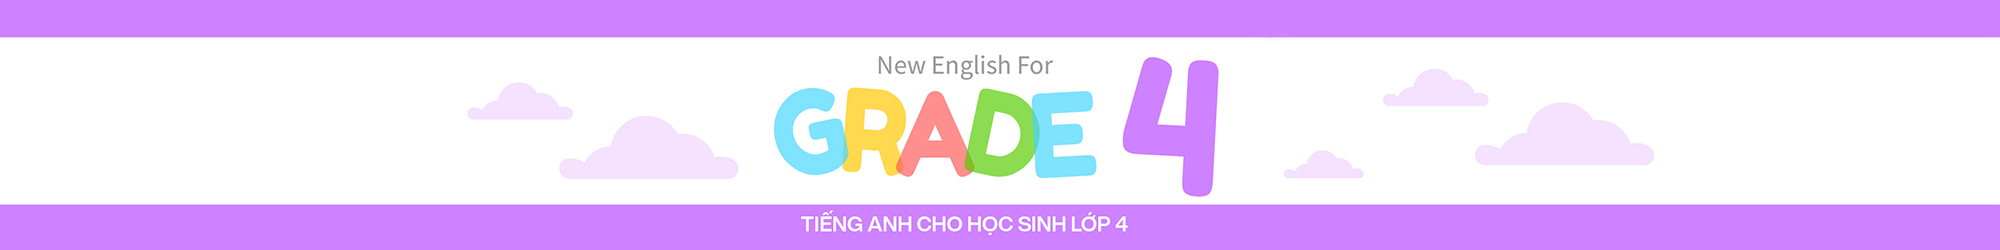 NEW ENGLISH FOR GRADE 4